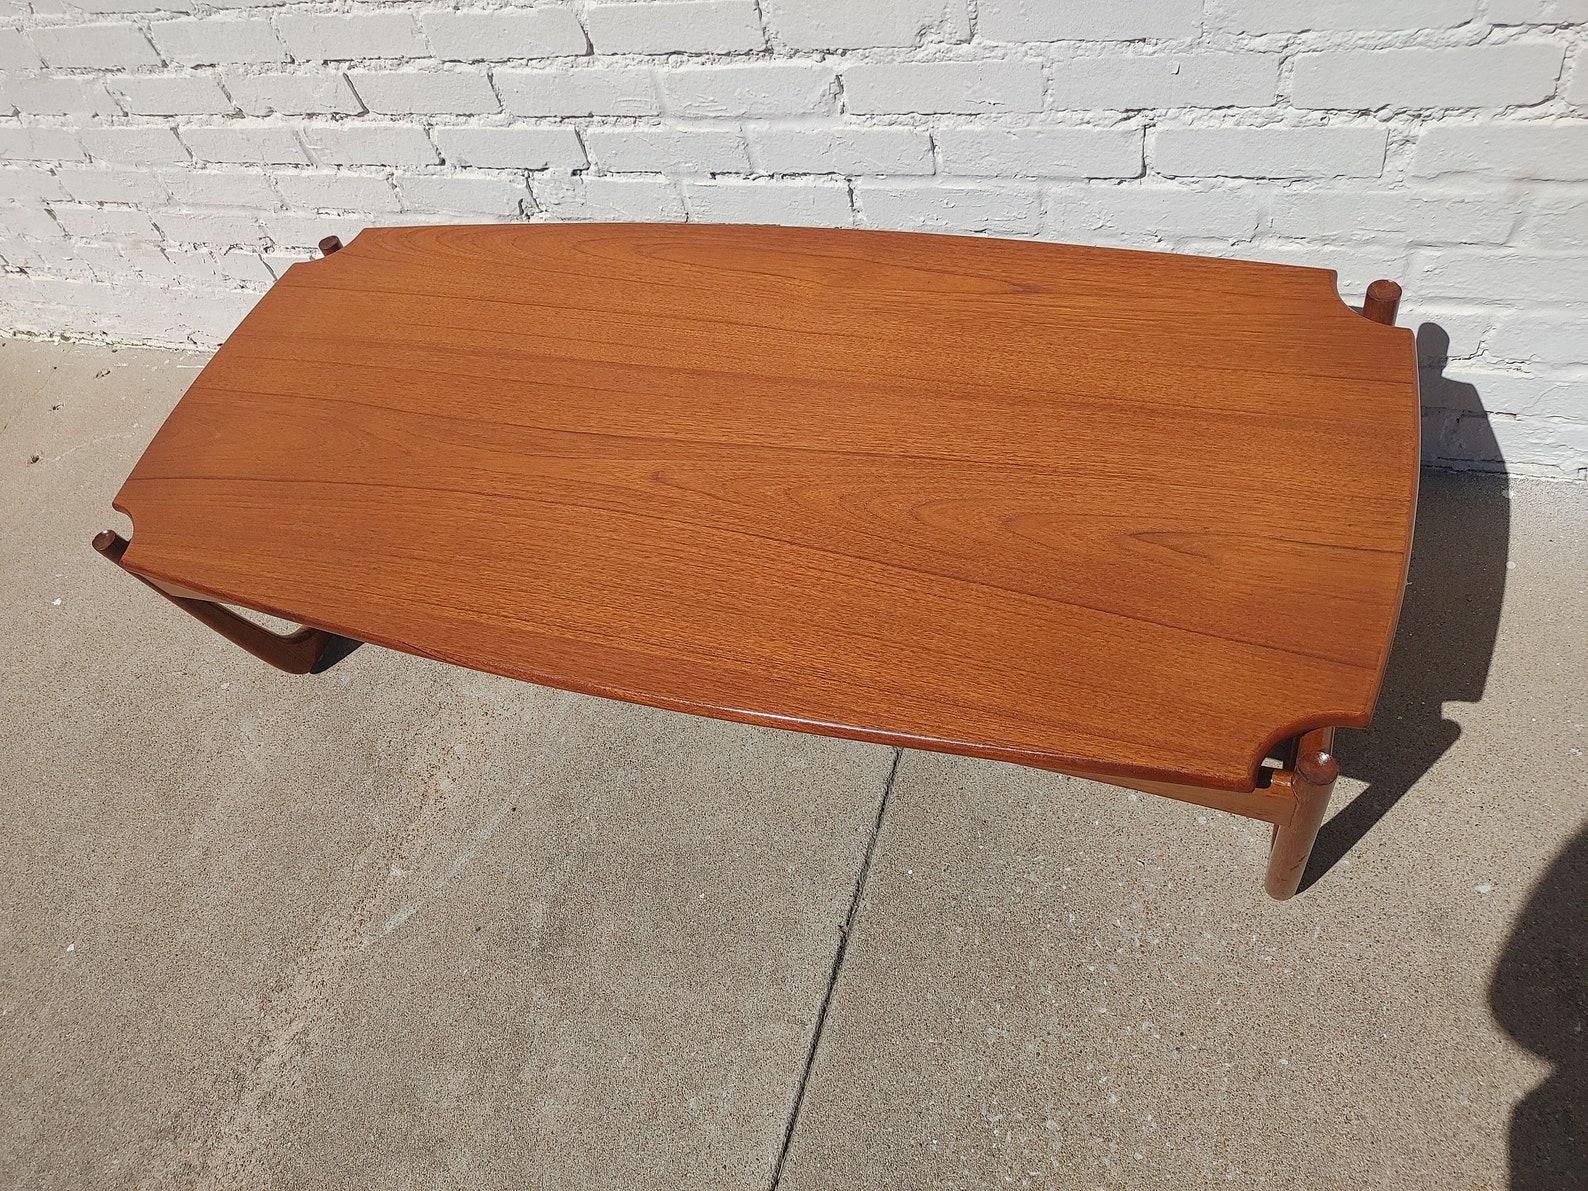 Mid Century Danish Modern Teak Coffee Table

Above average vintage condition and structurally sound. Has some expected slight finish wear and scratching. Outdoor listing pictures might appear slightly darker or more red than the item does